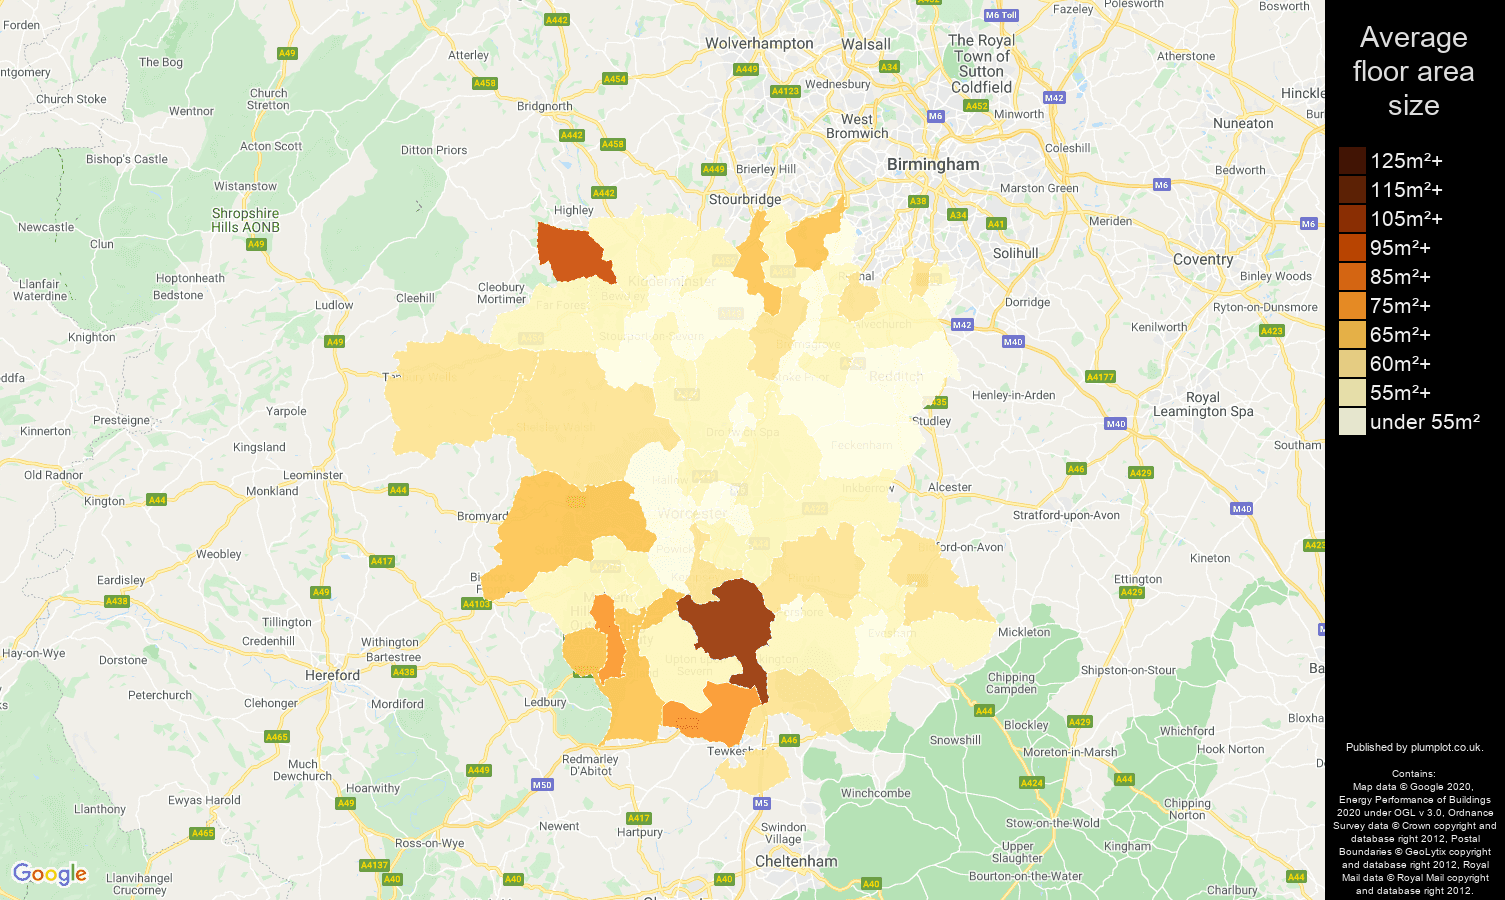 Worcestershire map of average floor area size of flats